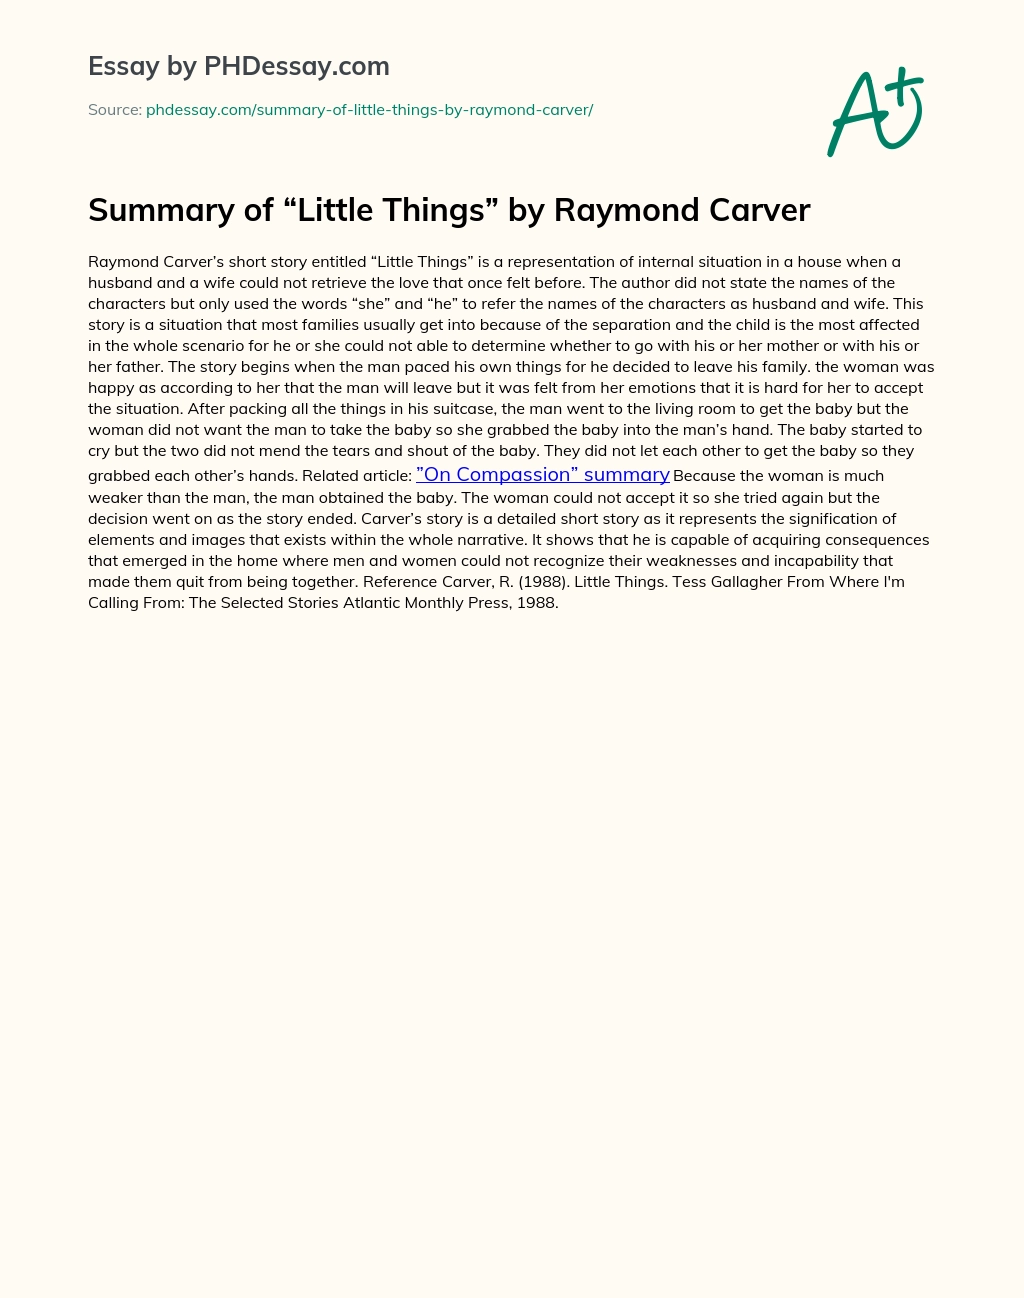 Summary of “Little Things” by Raymond Carver essay